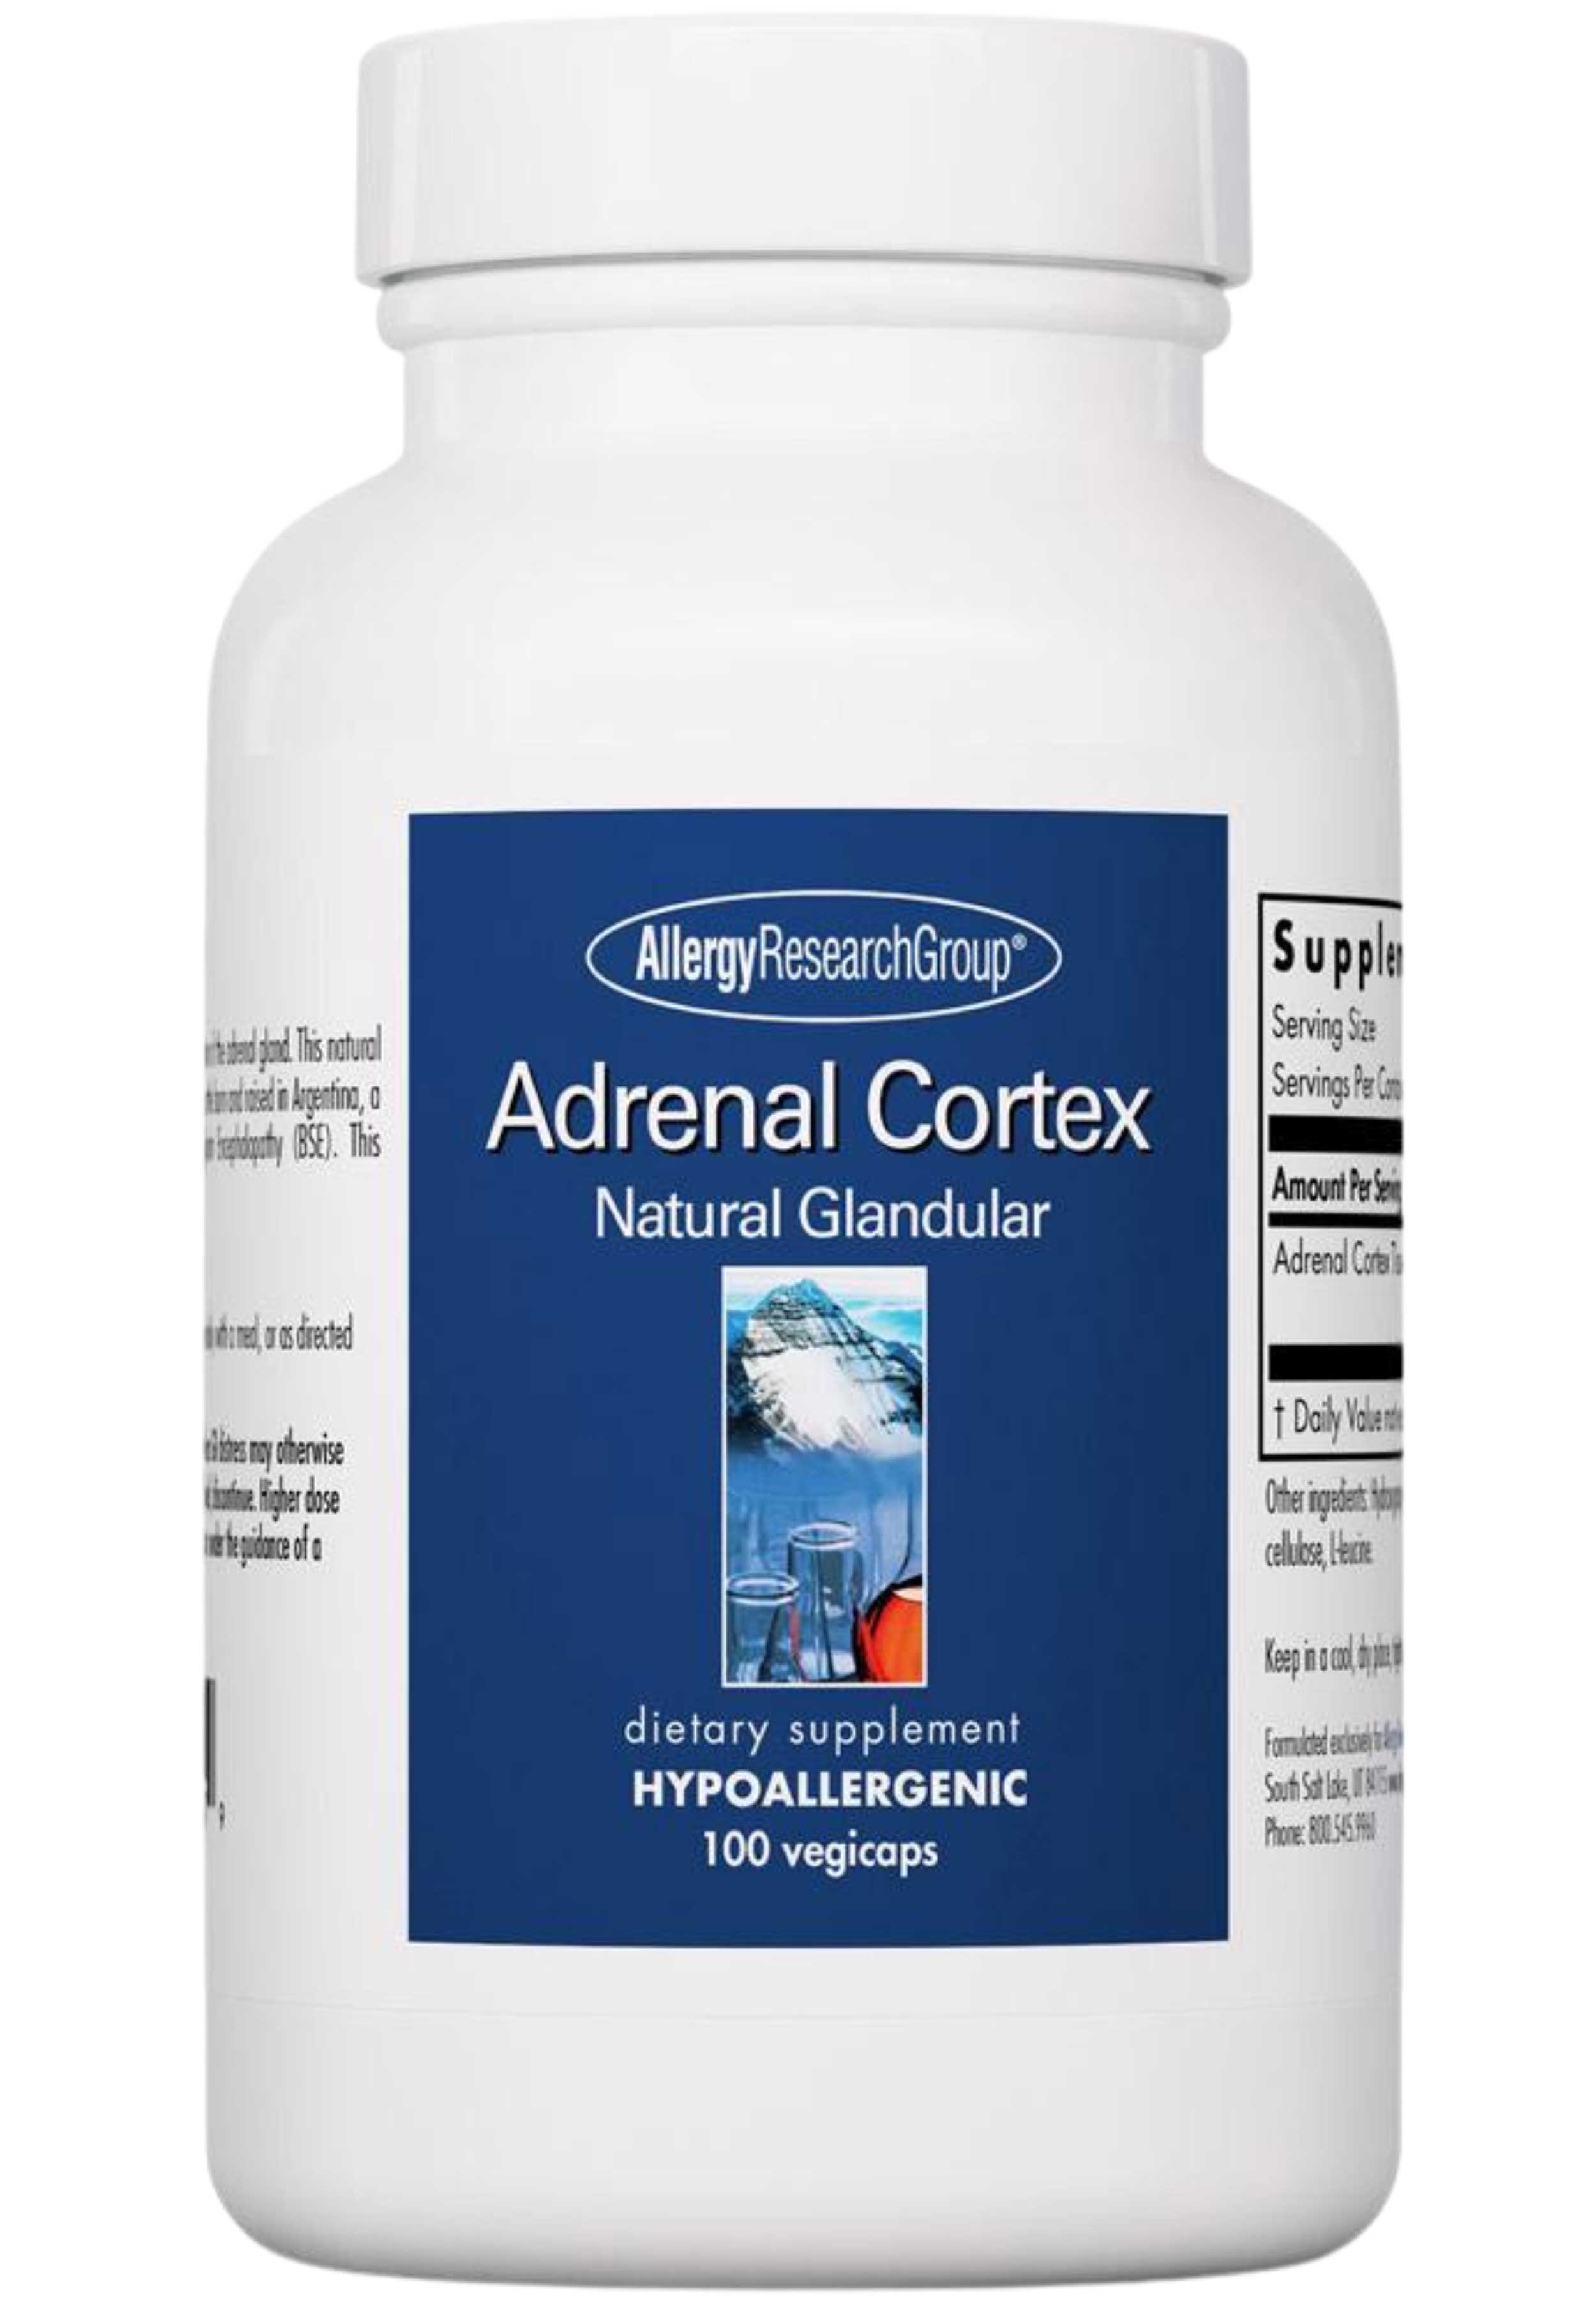 Allergy Research Group Adrenal Cortex